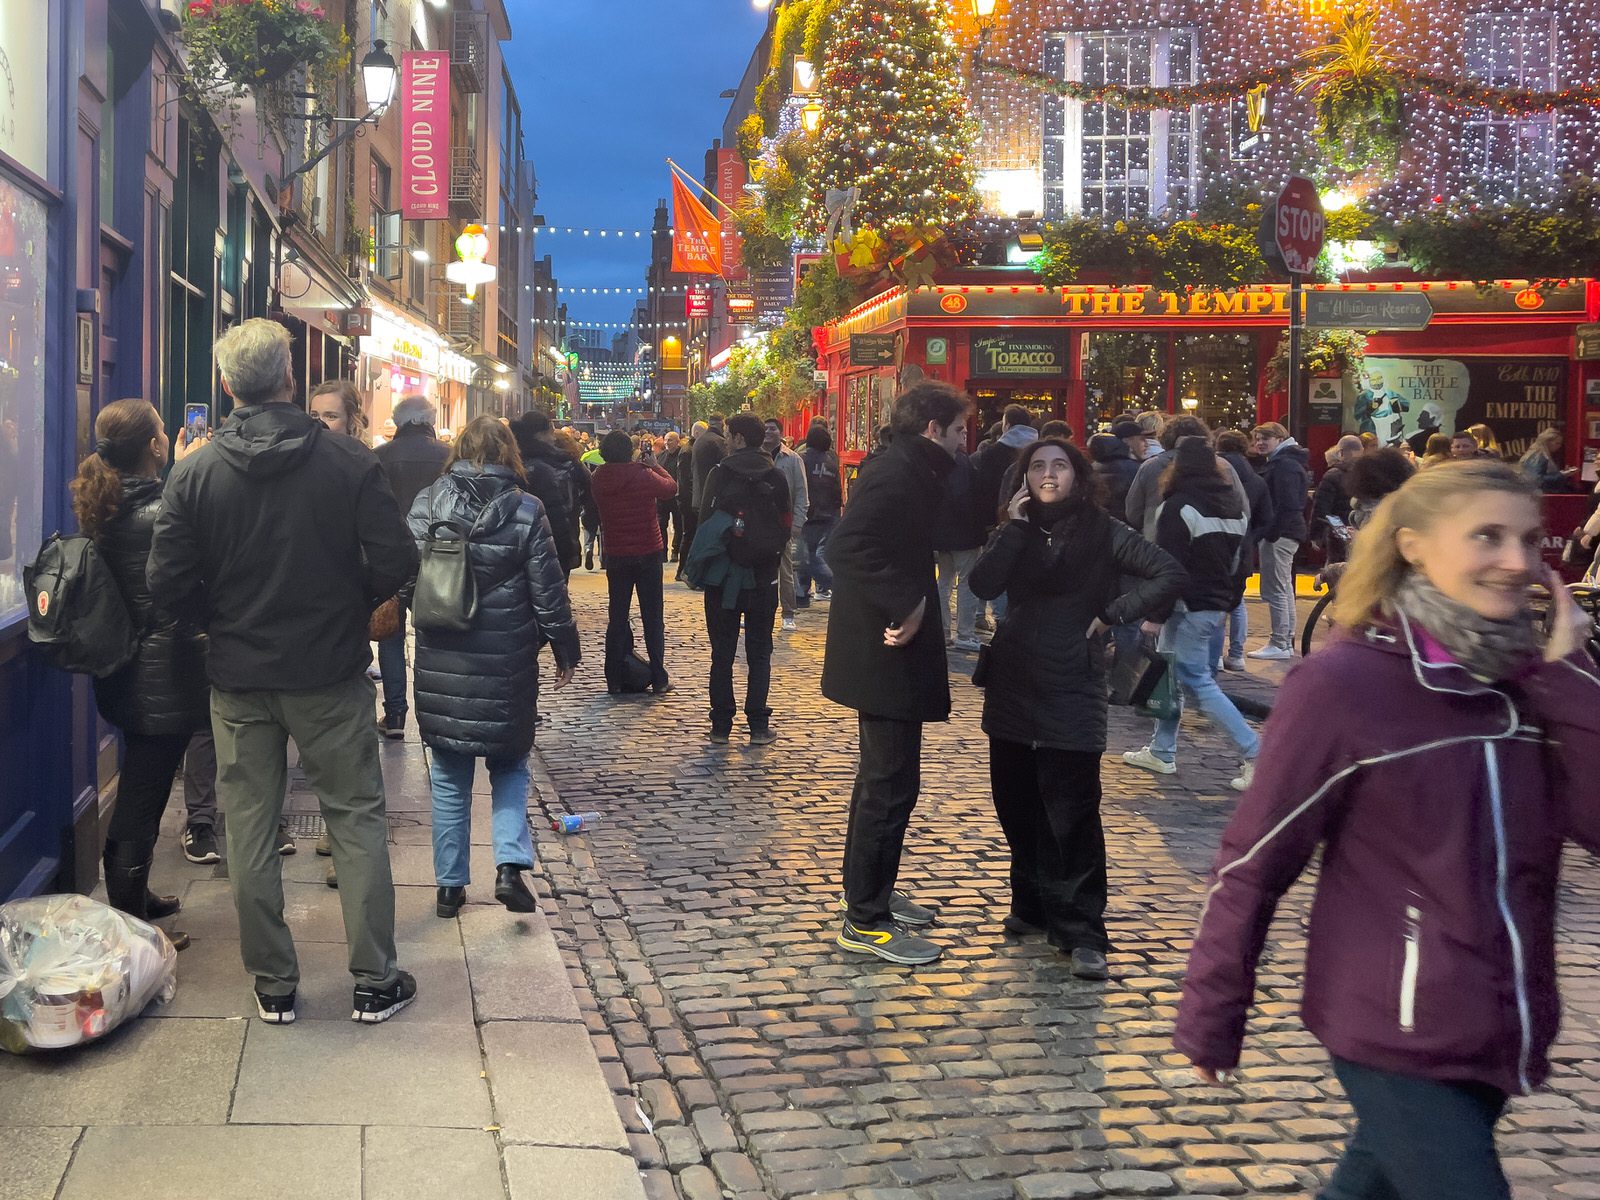 I VISITED TEMPLE BAR TODAY [AS NIGHTFALL WAS APPROACHING]-225359-1